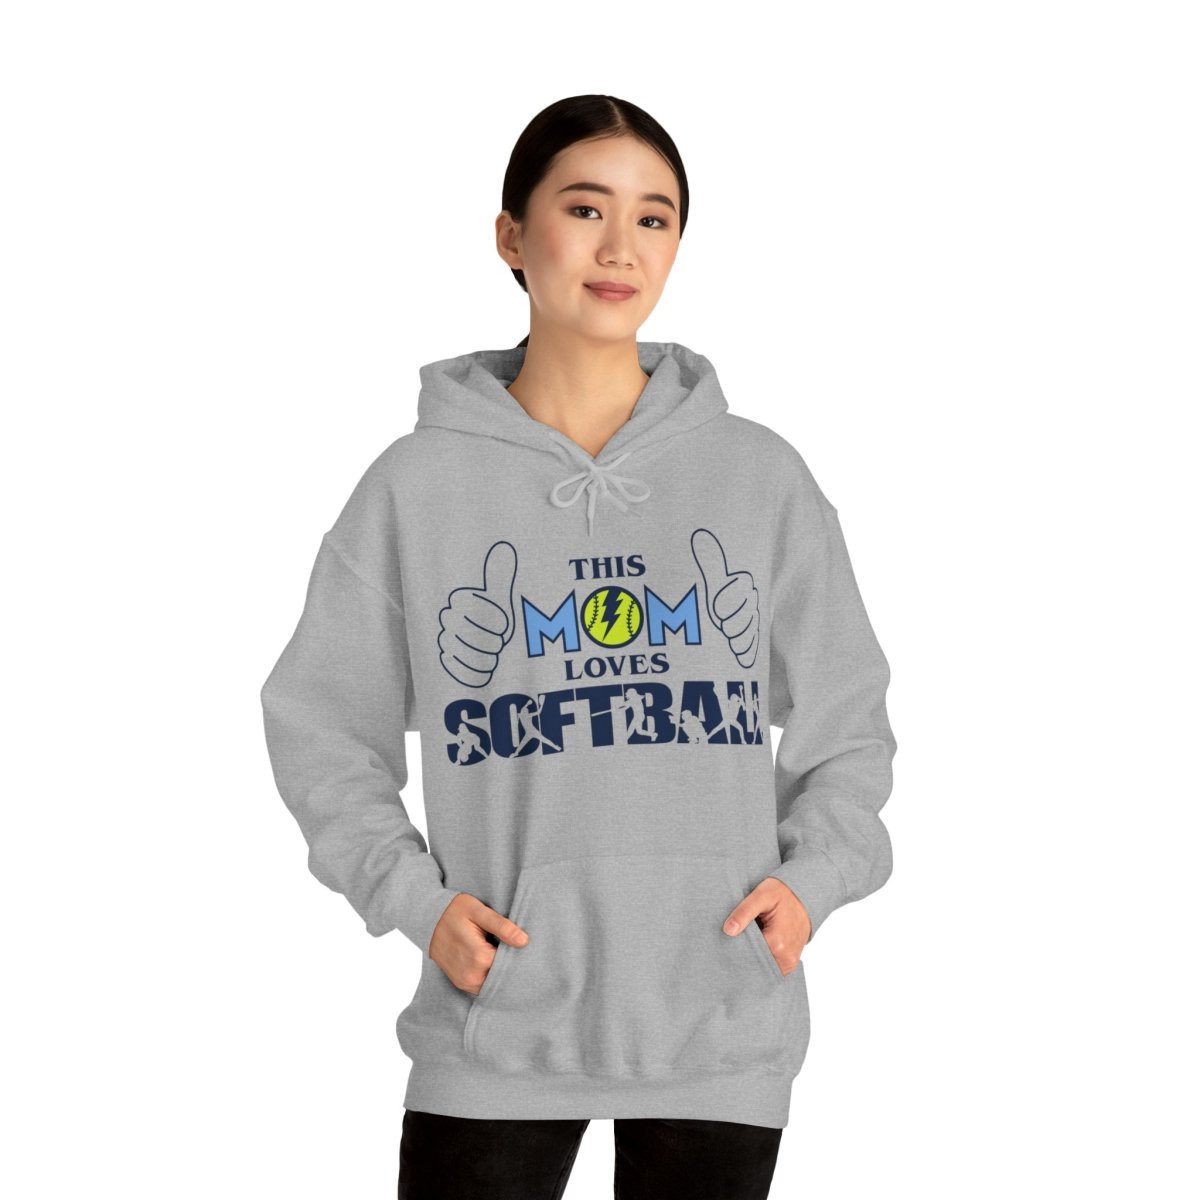 This Mom Cotton Hoodie